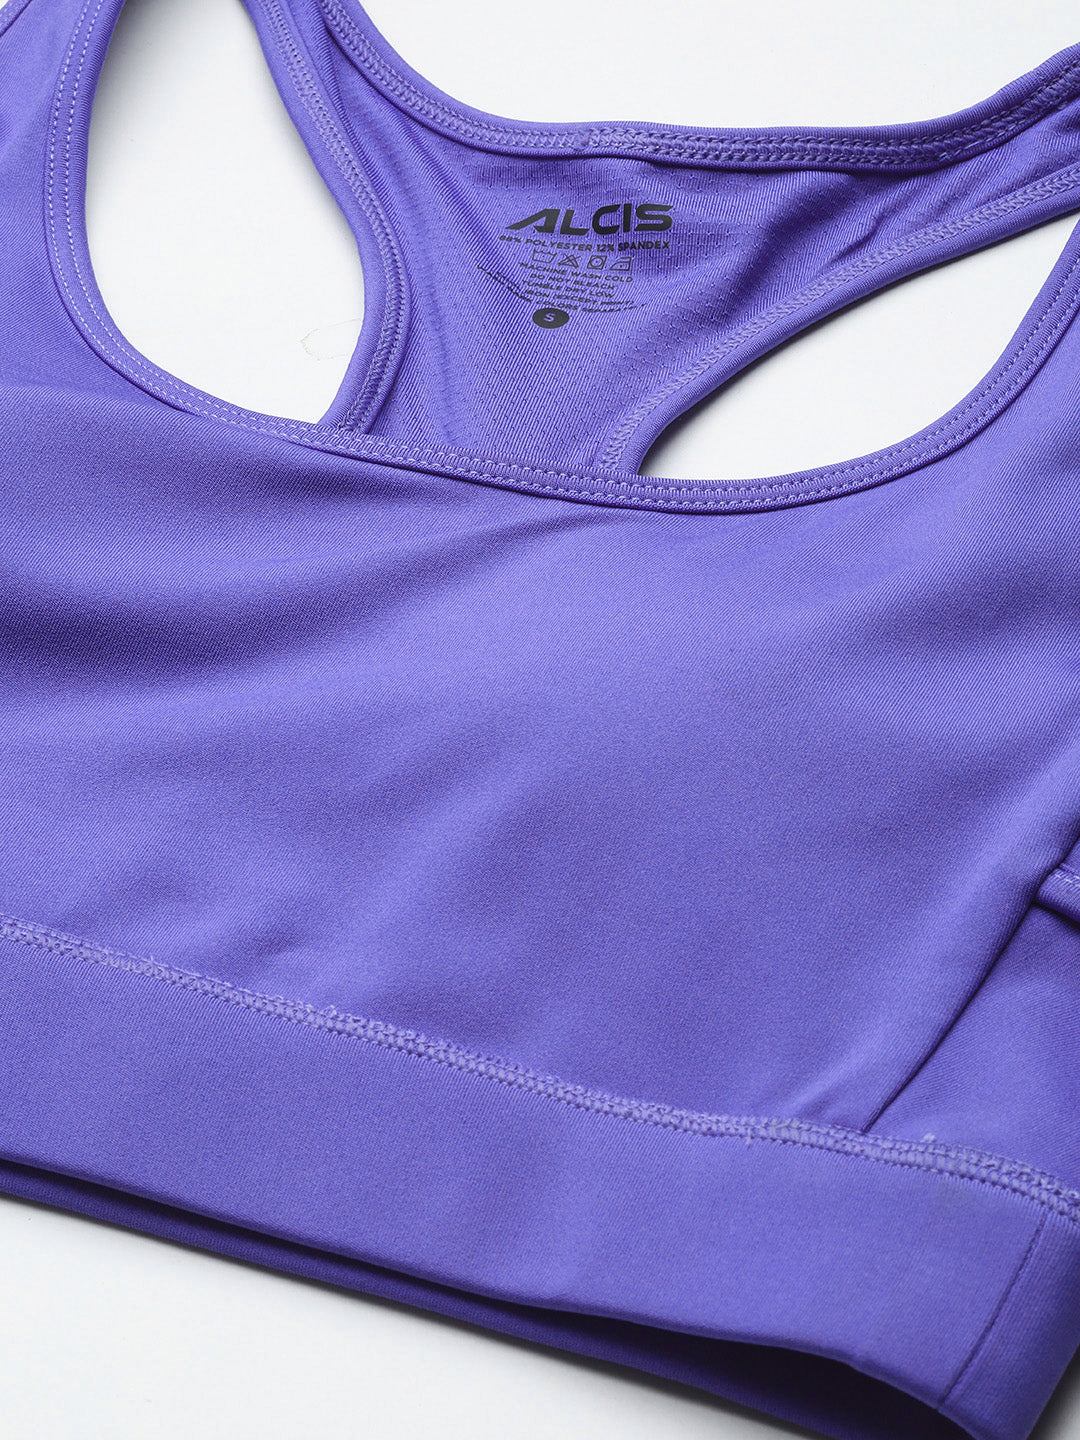 Lilac Training Sports Bra for Intense Sessions